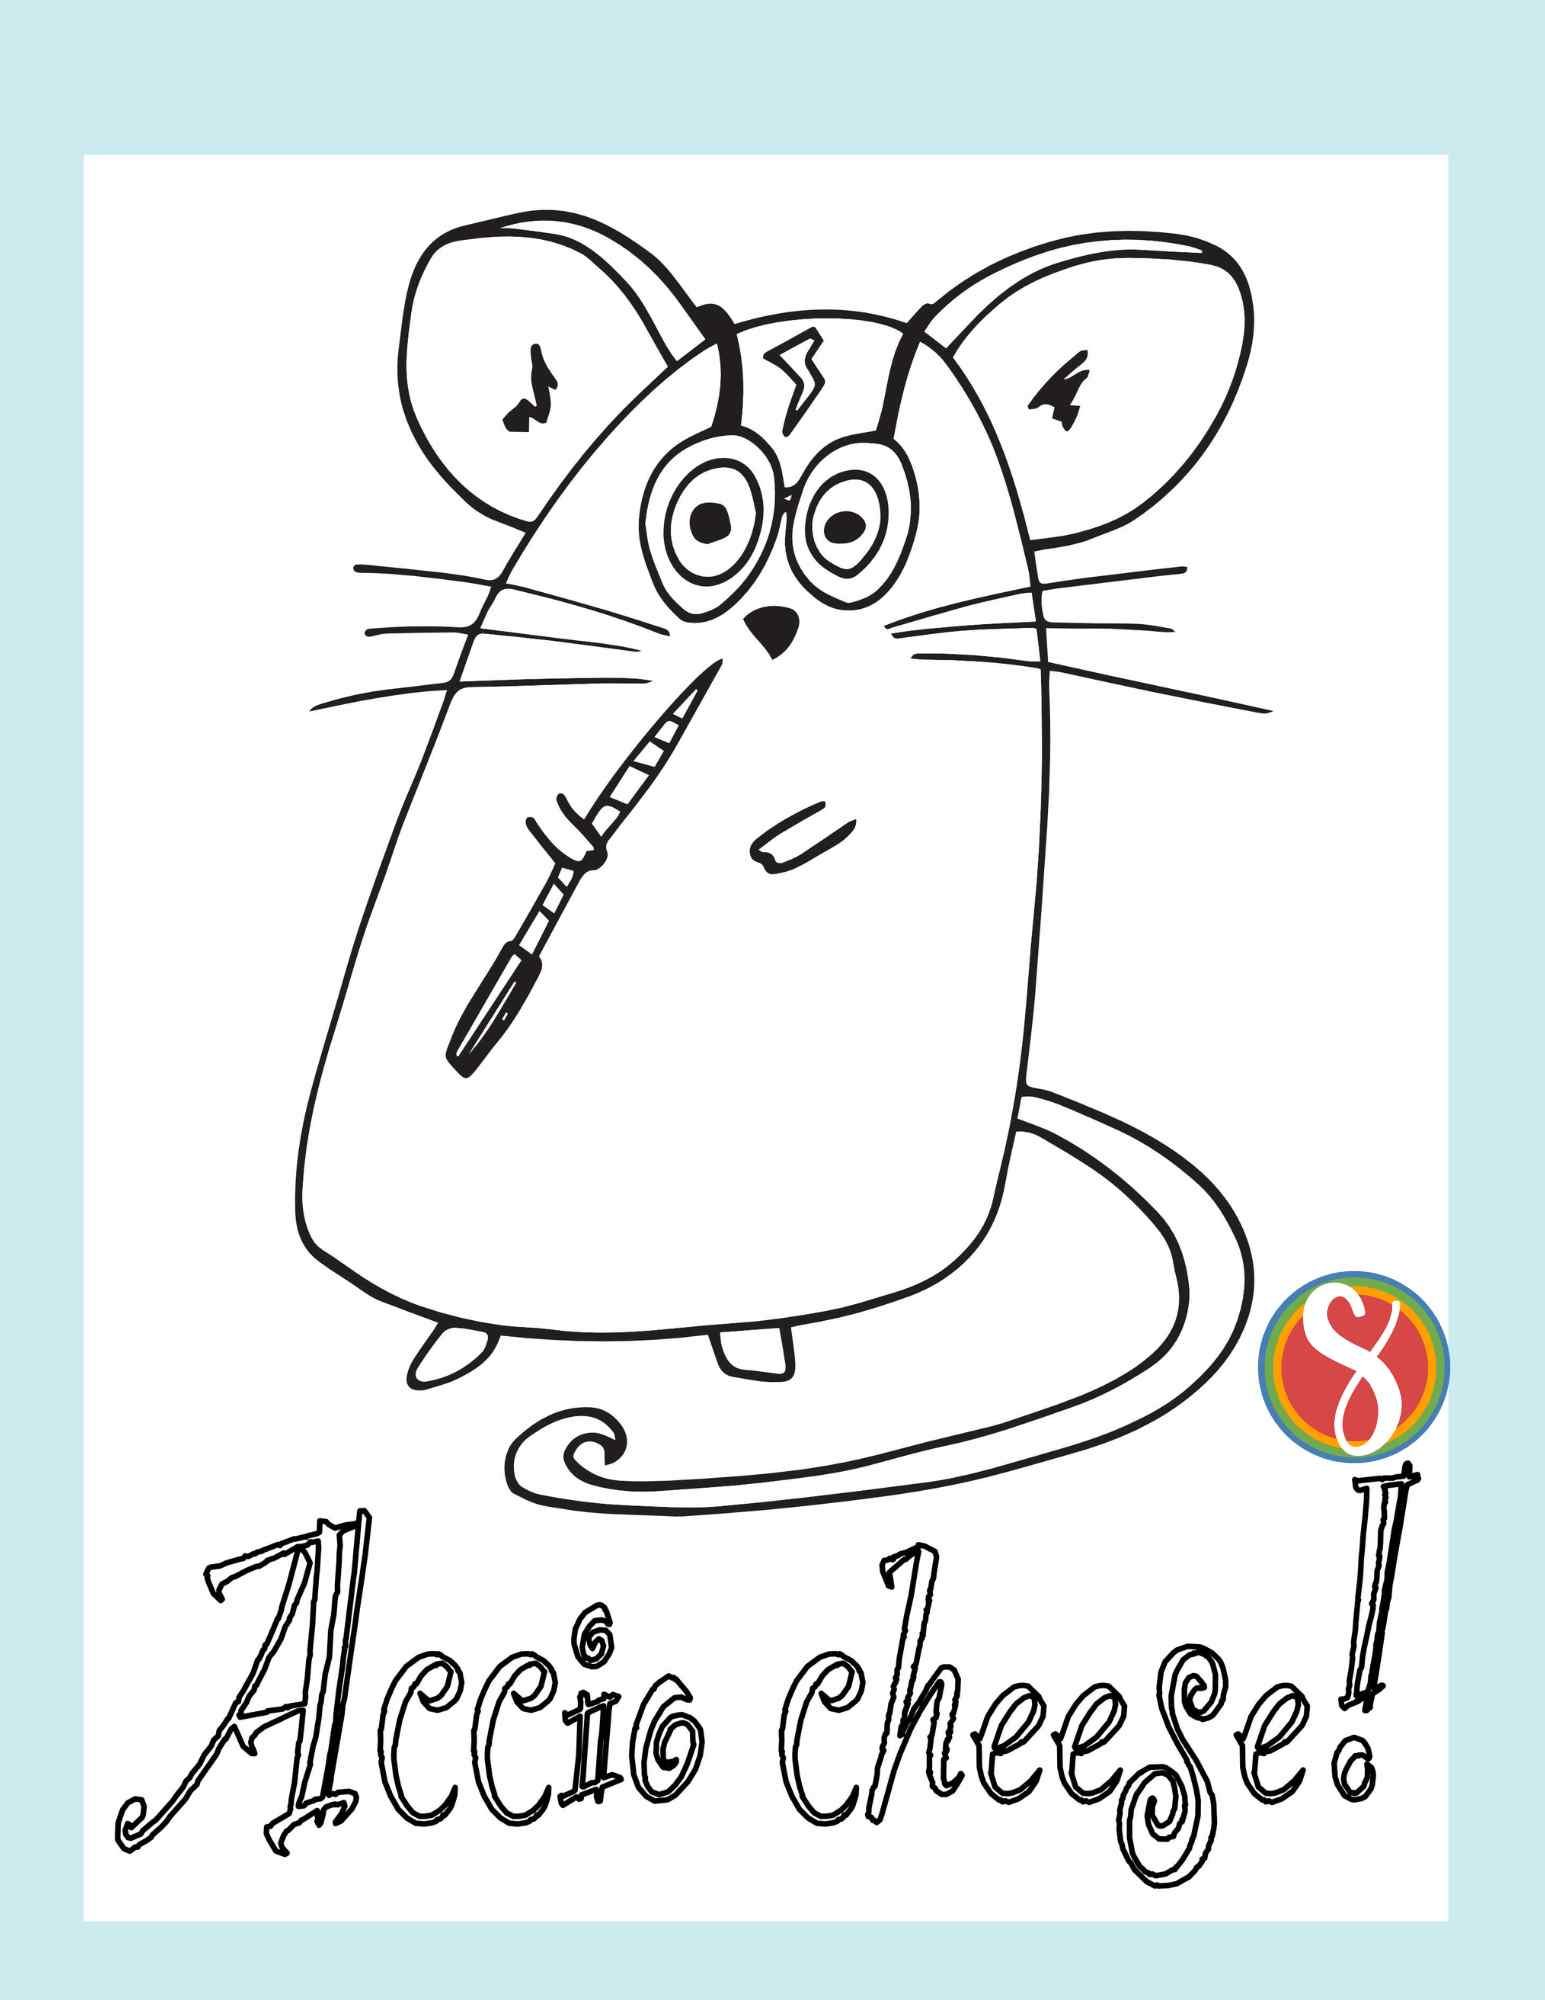 mouse coloring page, mouse has glasses and wand and Harry Potter scar. Text reads "Accio cheese!"